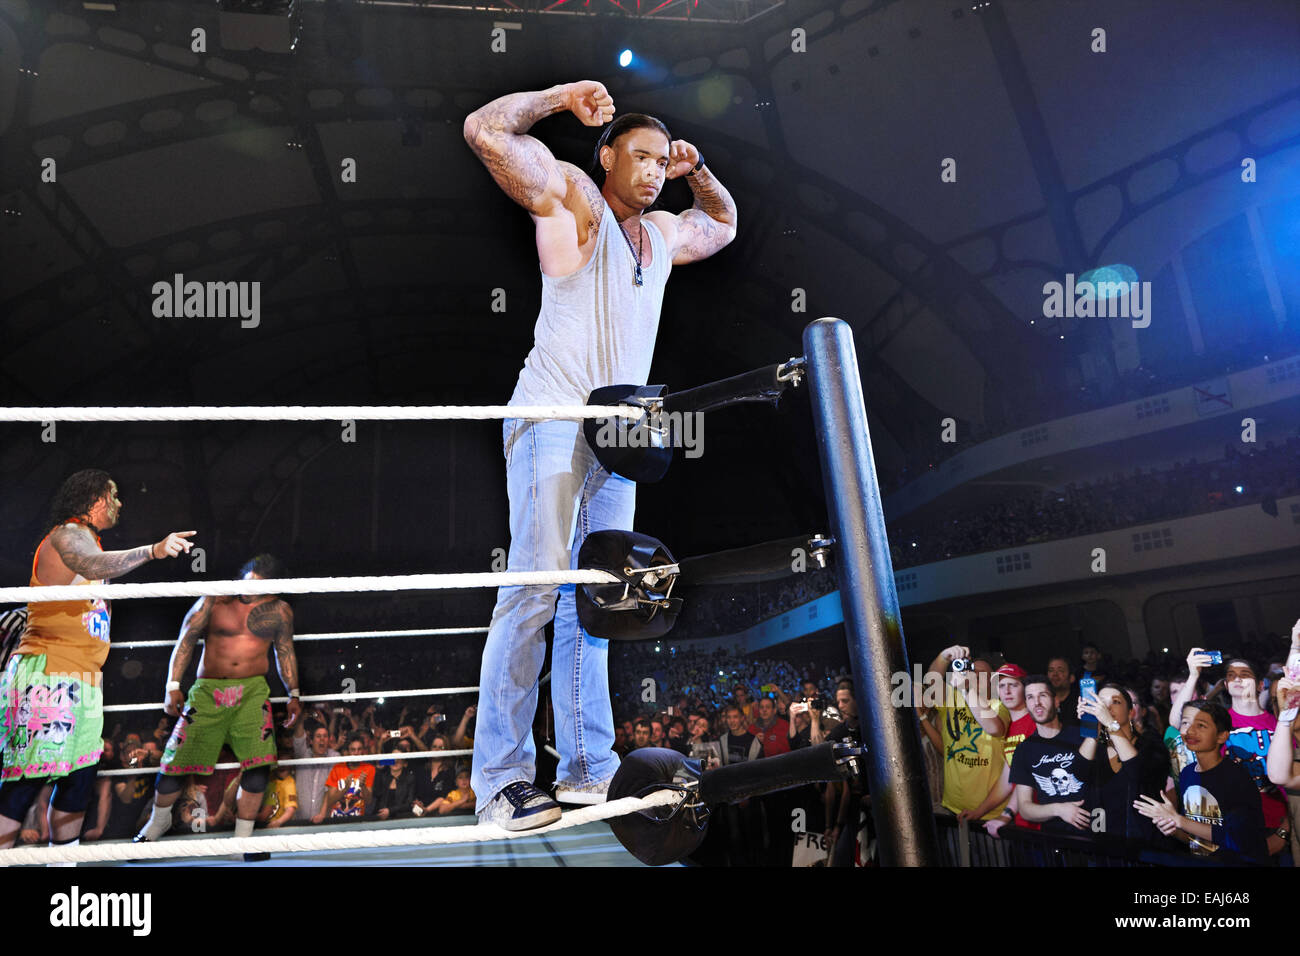 HANDOUT - Former national goal keeper Tim Wiese poses during a wrestling event in Frankfurt/Main, Germany, 15 November 2014. Photo: Affonso Gavinha/WWE (ATTENTION: IMAGE FOR EDITORIAL USE ONLY BY MENTIONTIONING THE SOURCE: Affonso Gavinha/WWE) EDITORIAL USE ONLY Stock Photo